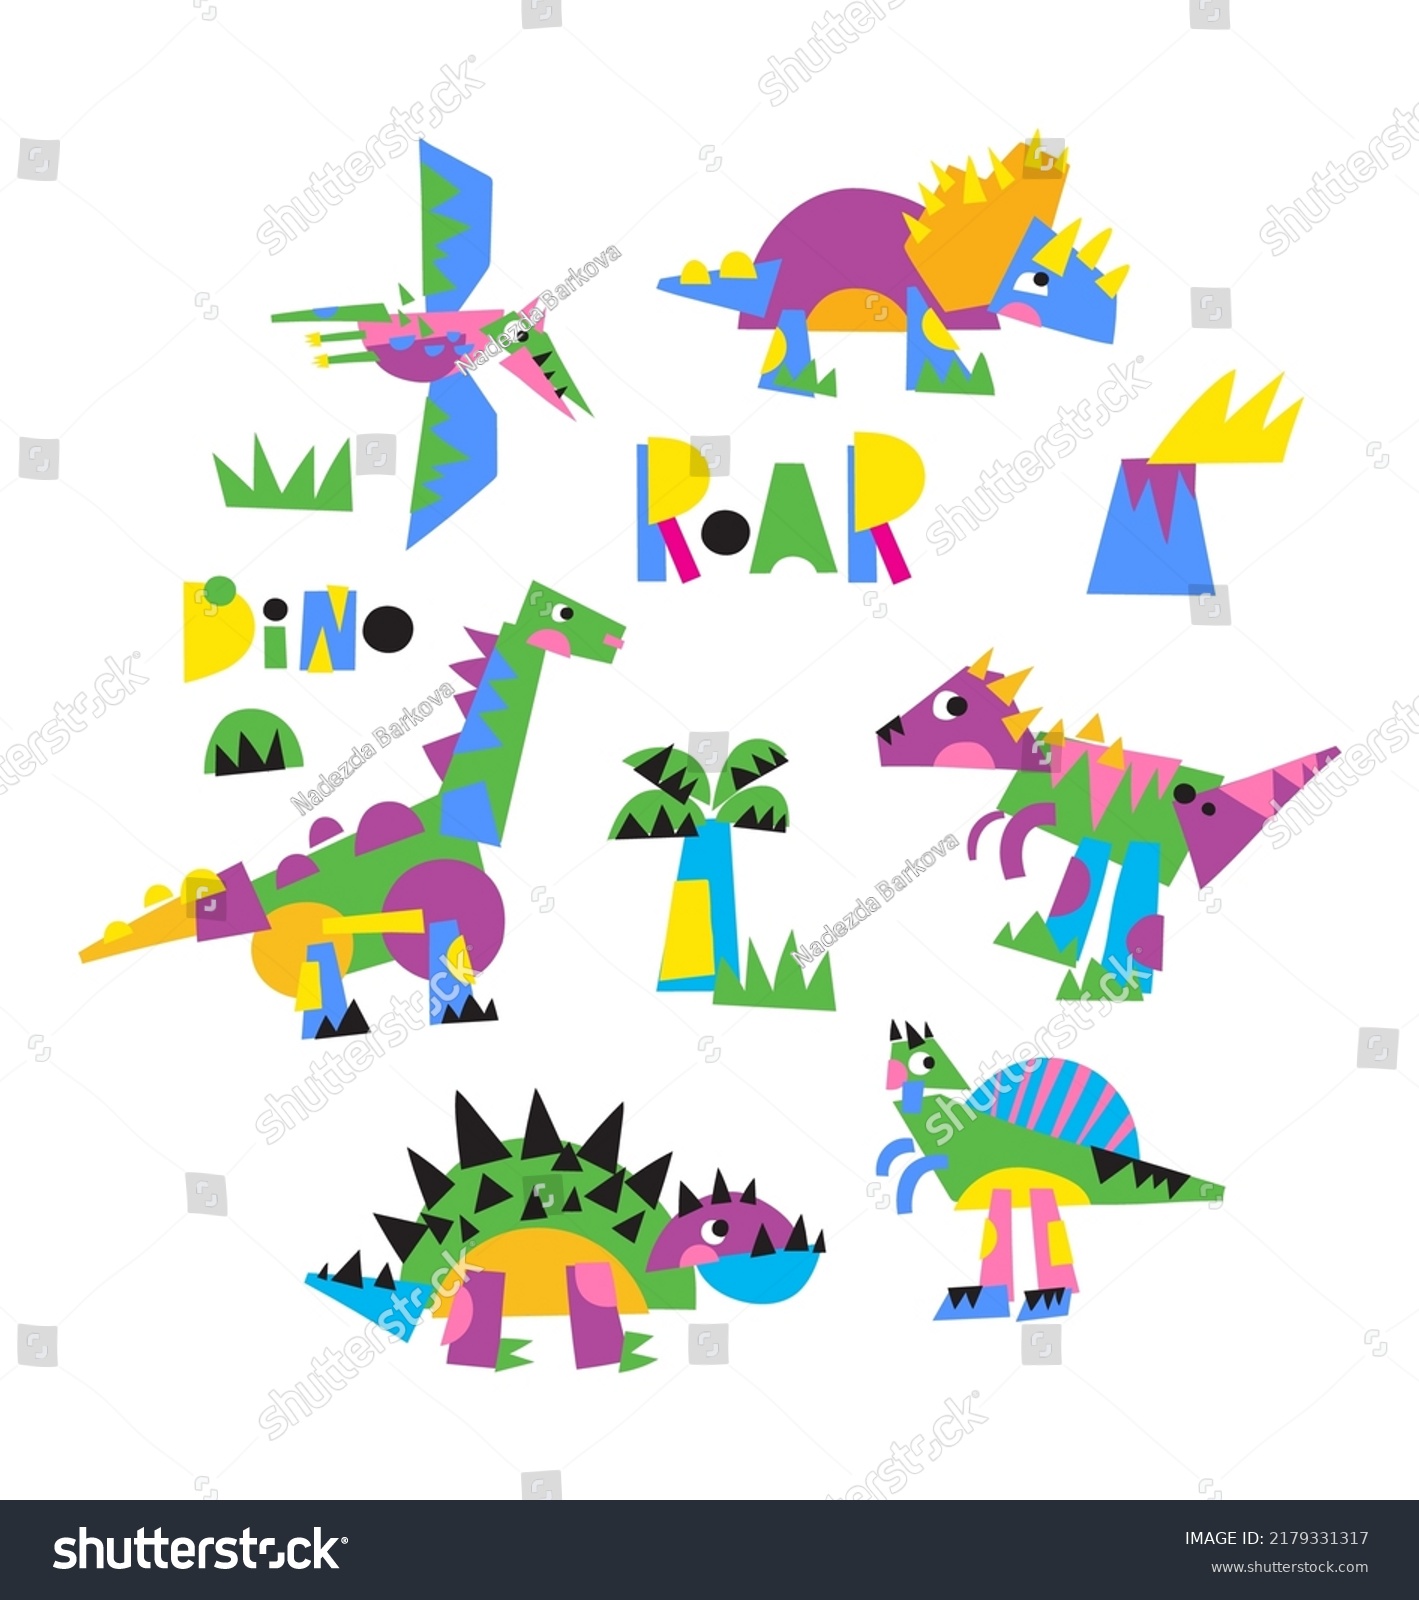 SVG of Fantastic cartoon Dino - vector print. dinosaur from abstract geometric shapes collage in modern style svg